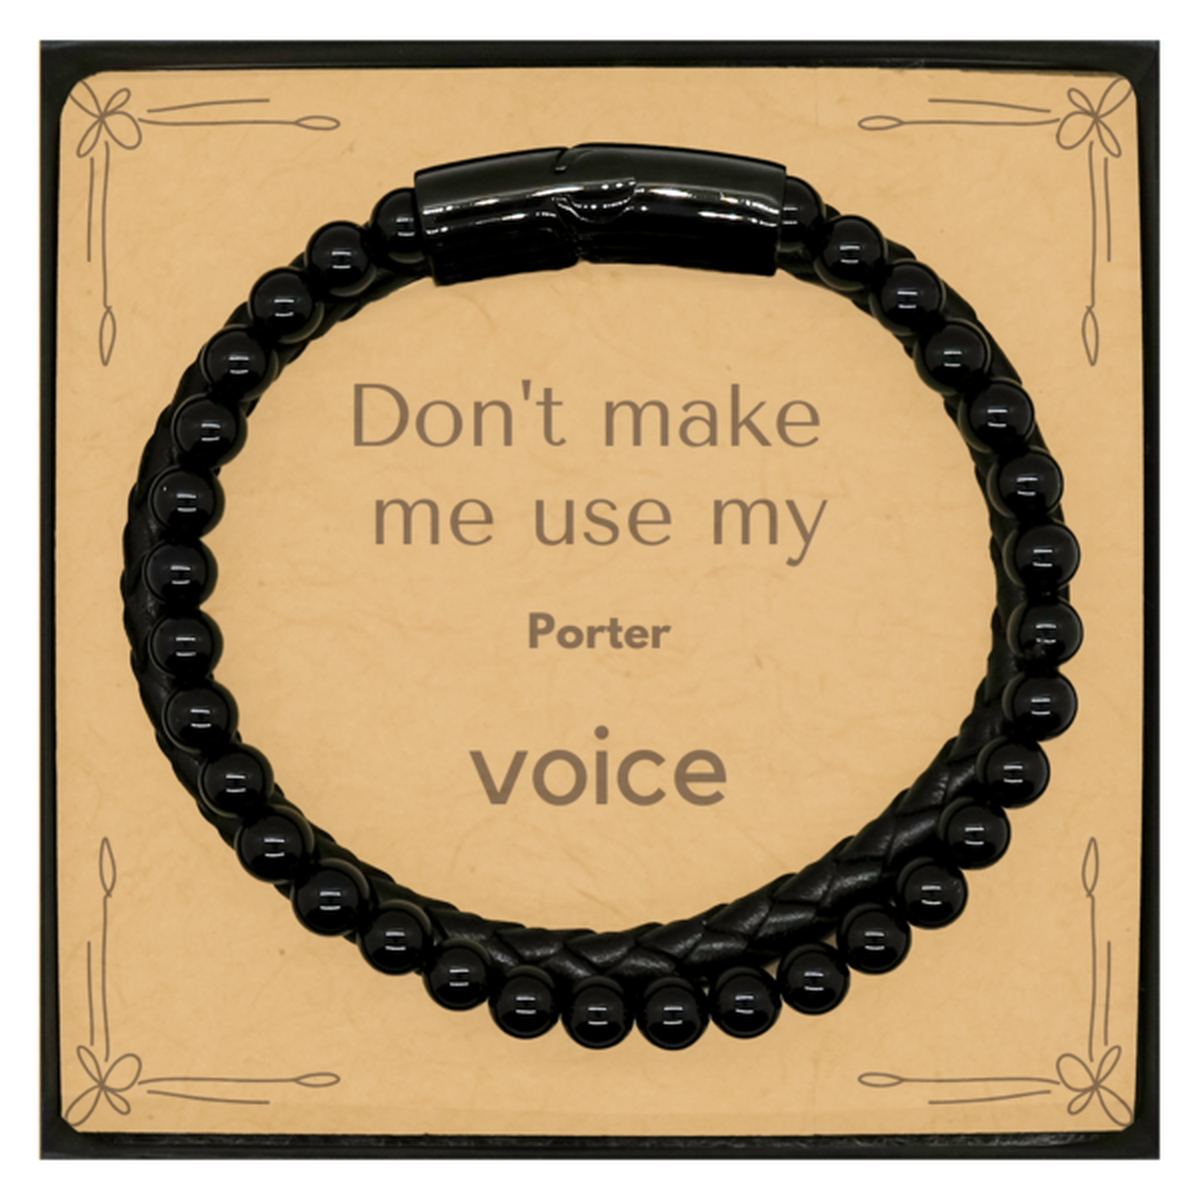 Don't make me use my Porter voice, Sarcasm Porter Card Gifts, Christmas Porter Stone Leather Bracelets Birthday Unique Gifts For Porter Coworkers, Men, Women, Colleague, Friends